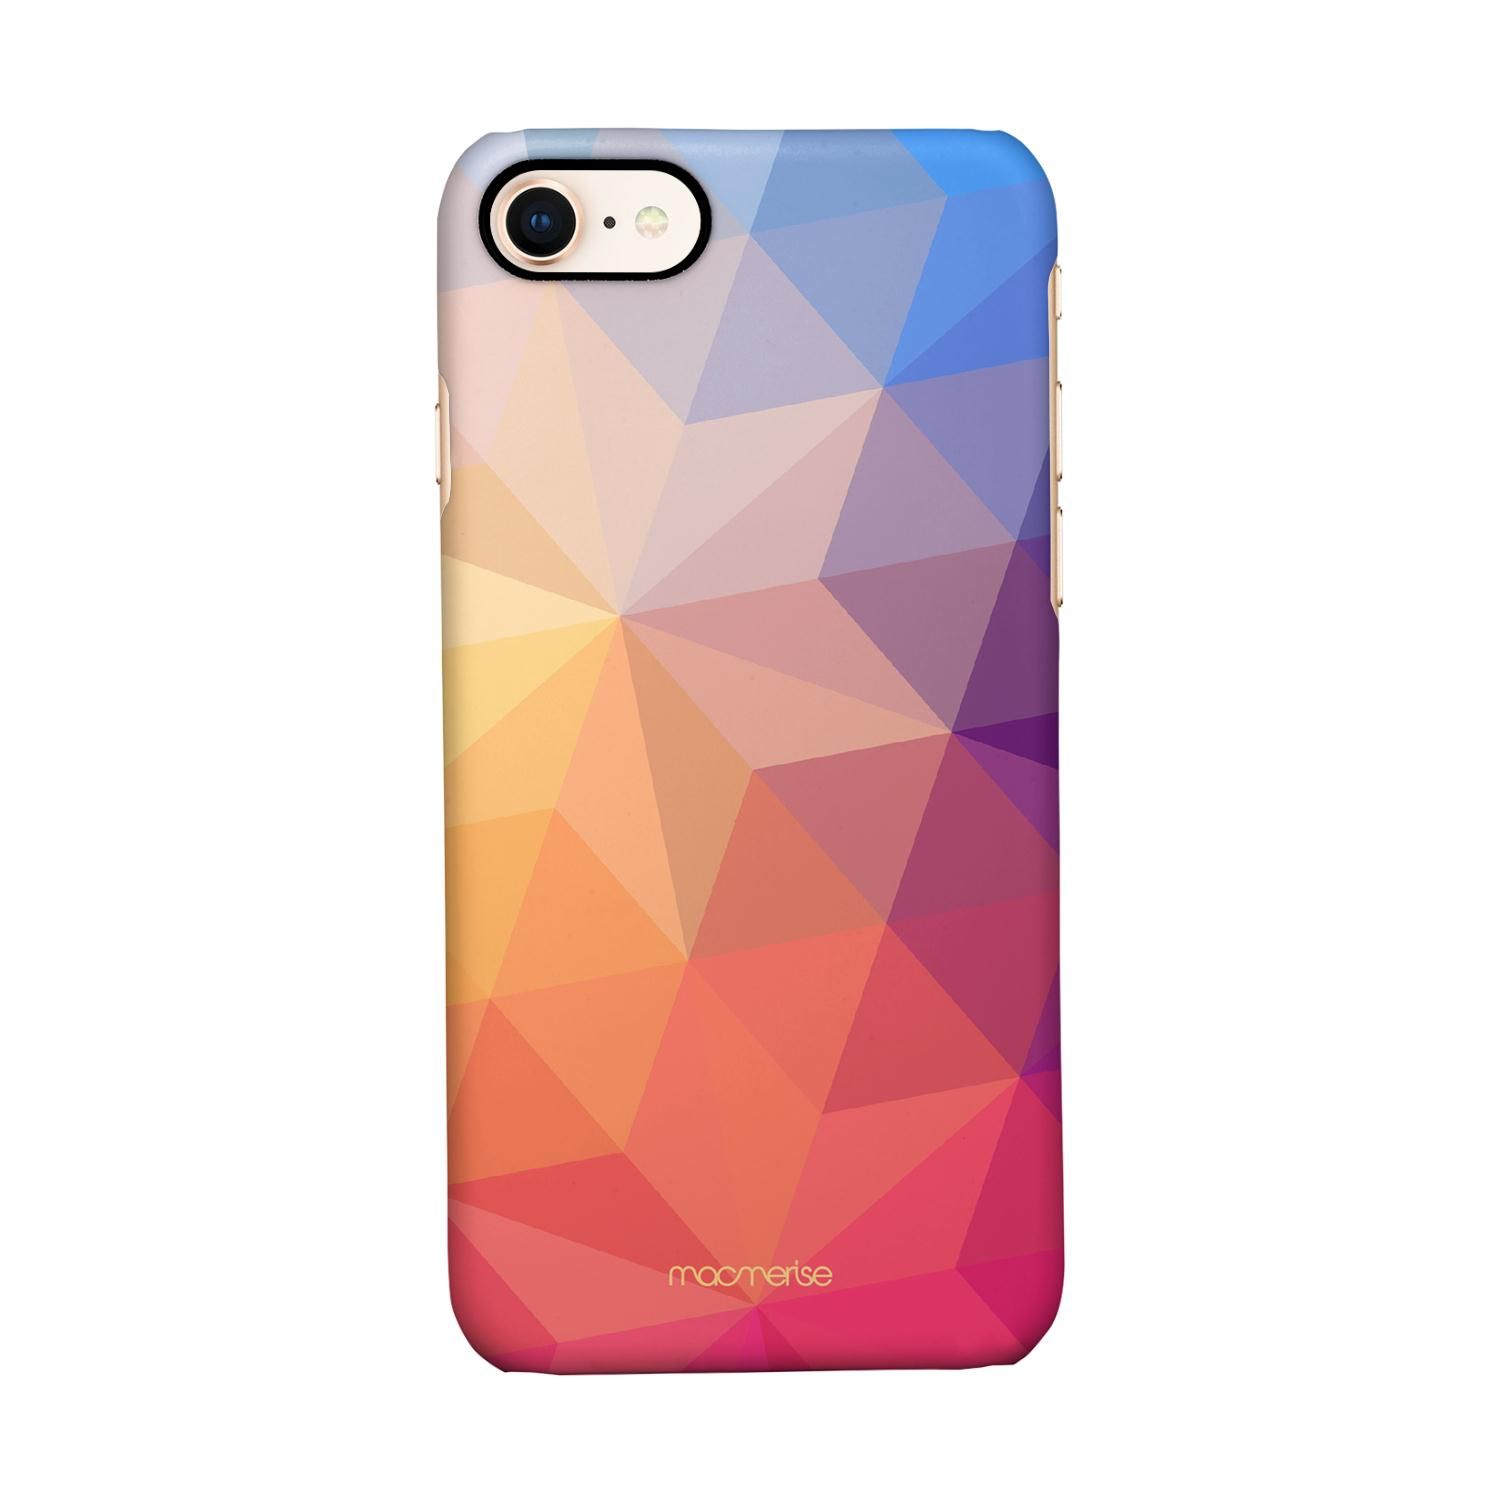 Buy Colour in our Stars - Sleek Phone Case for iPhone 7 Online